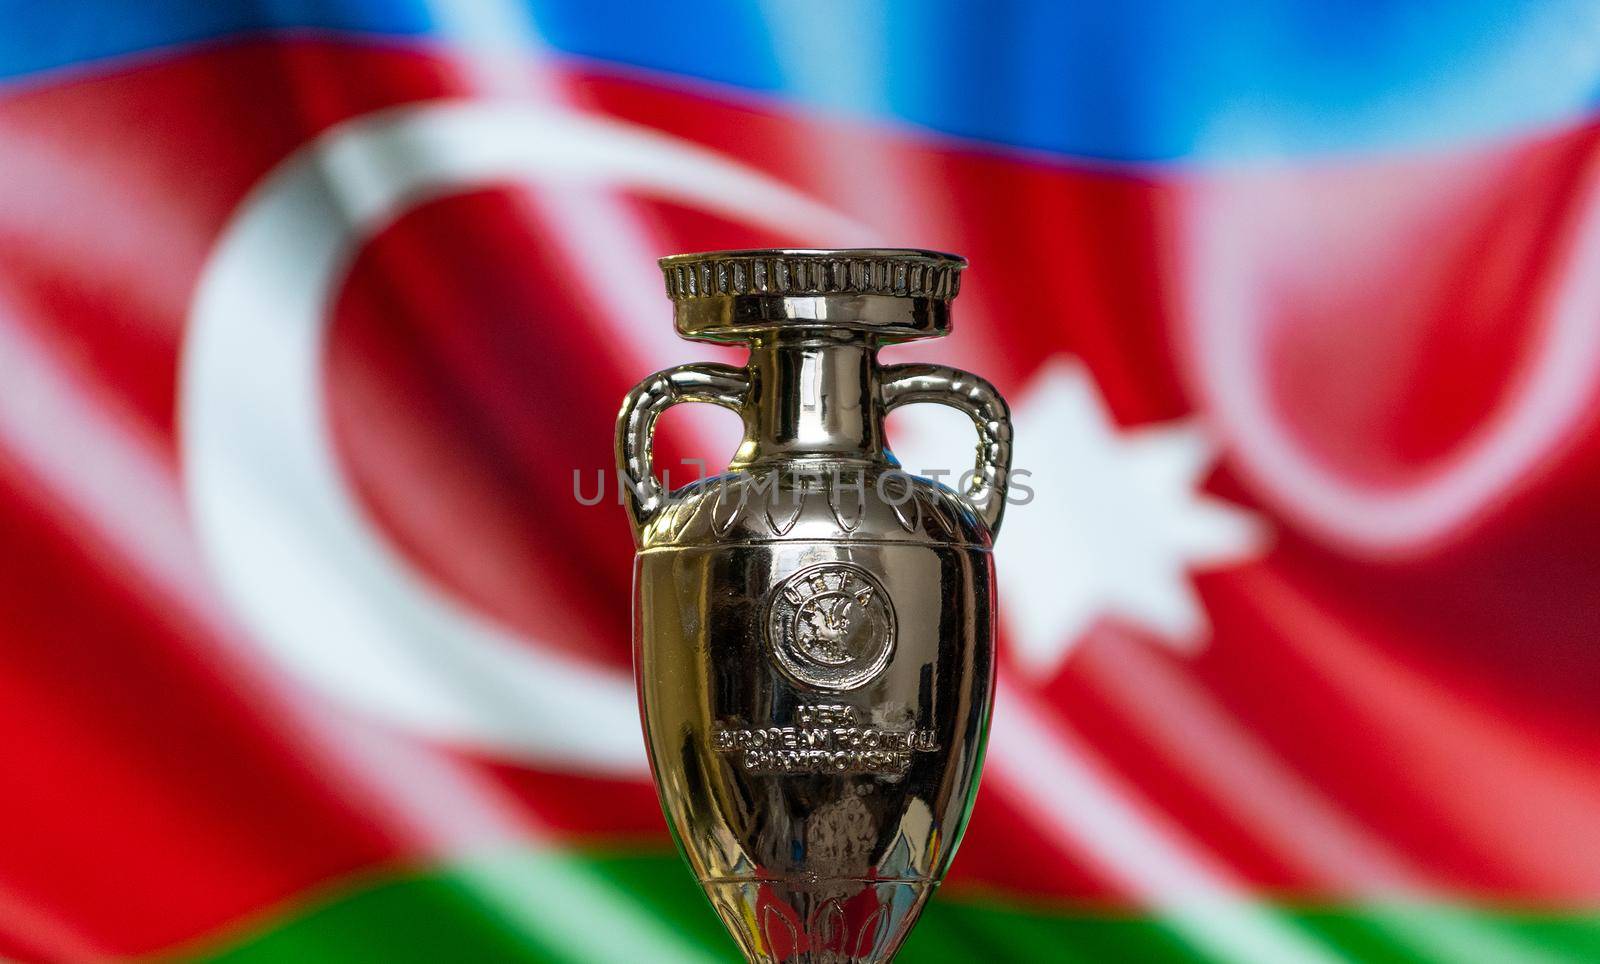 European Football Championship 2020 by fifg